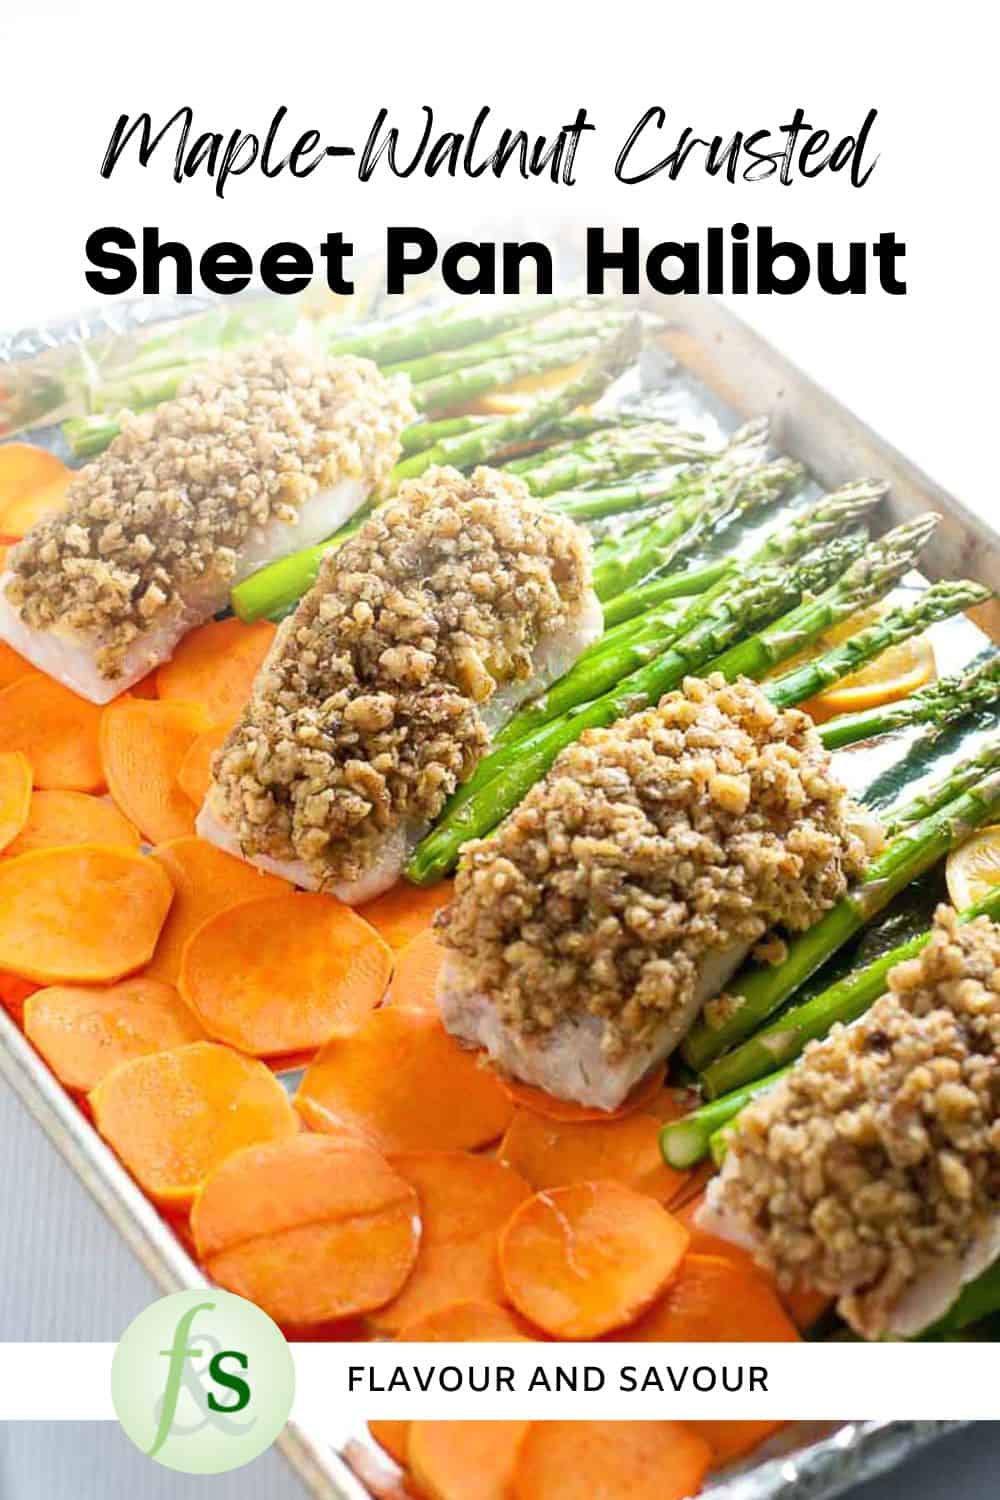 Image with text for maple walnut crusted sheet pan halibut.